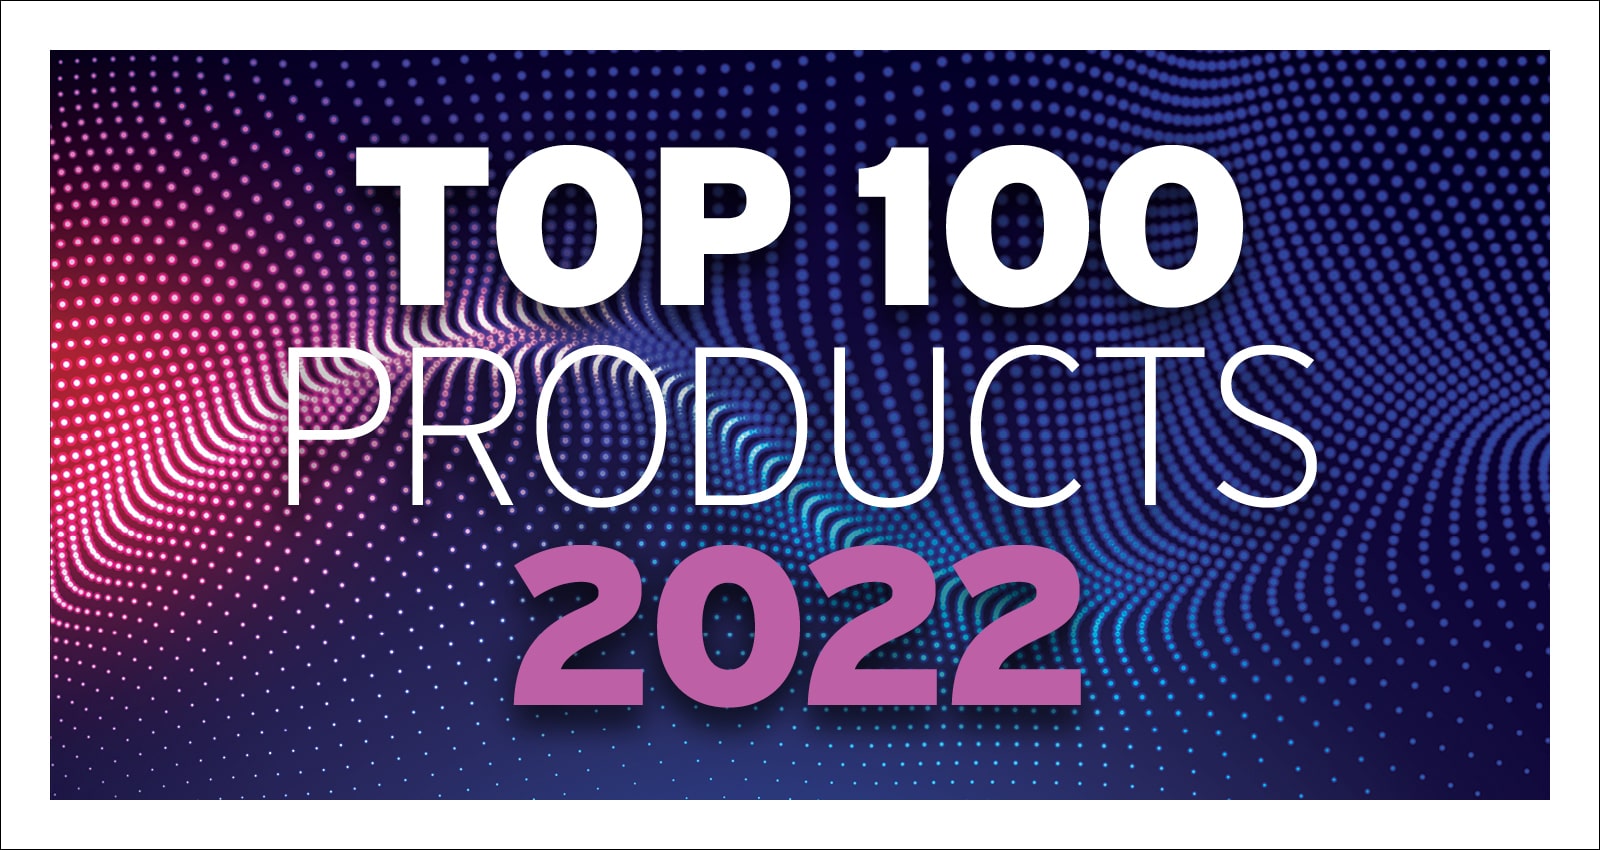 Top 100 Products chosen by Pro Builder readers